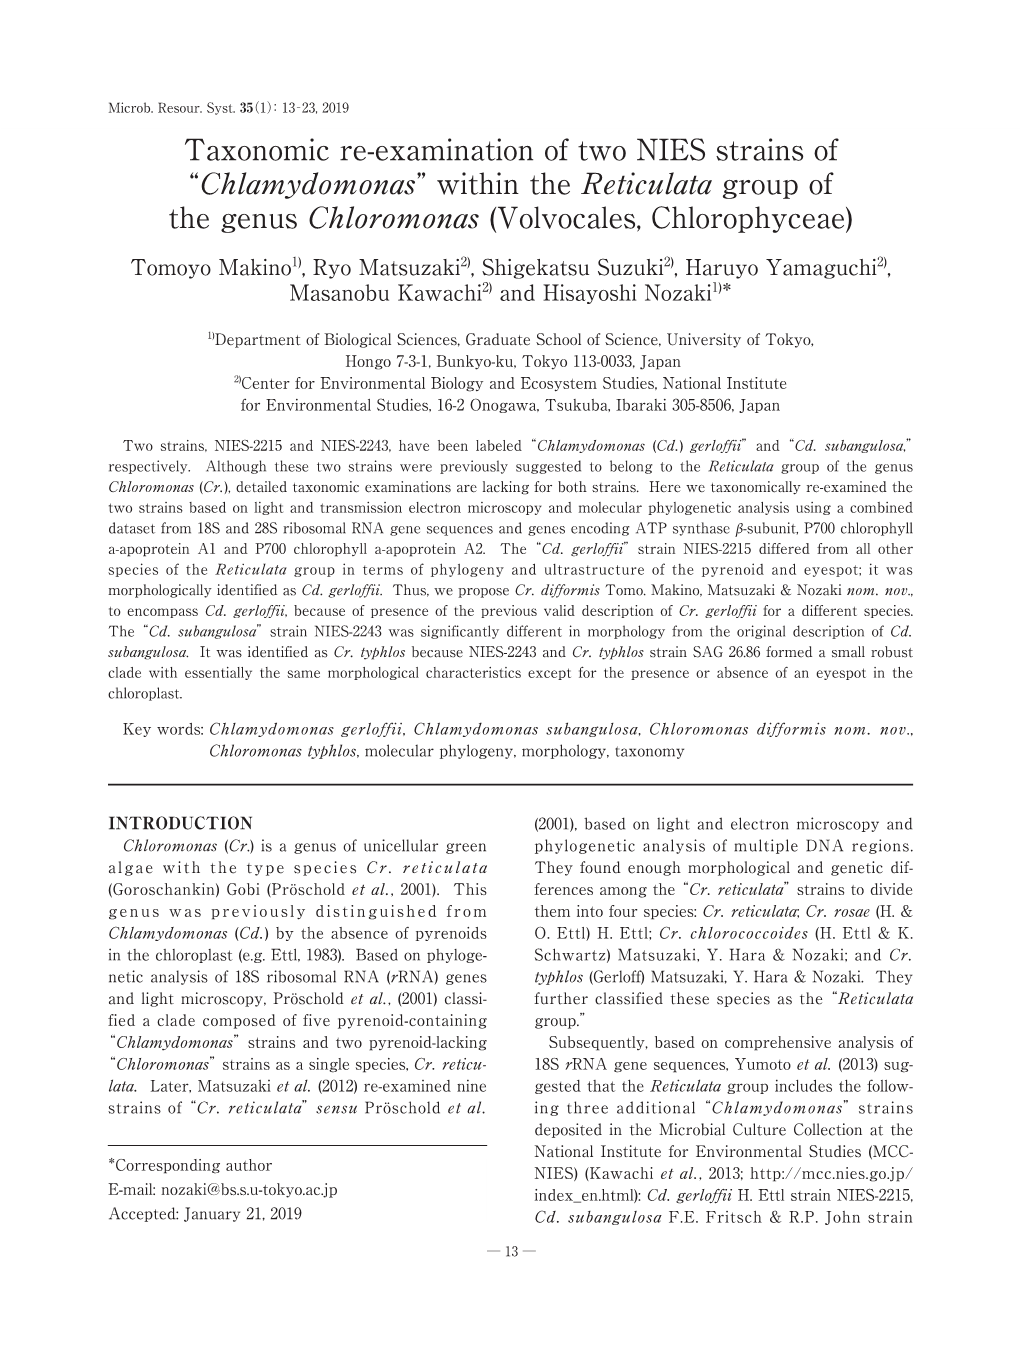 Taxonomic Re-Examination of Two NIES Strains of “Chlamydomonas” Within the Reticulata Group of the Genus Chloromonas (Volvocales, Chlorophyceae)